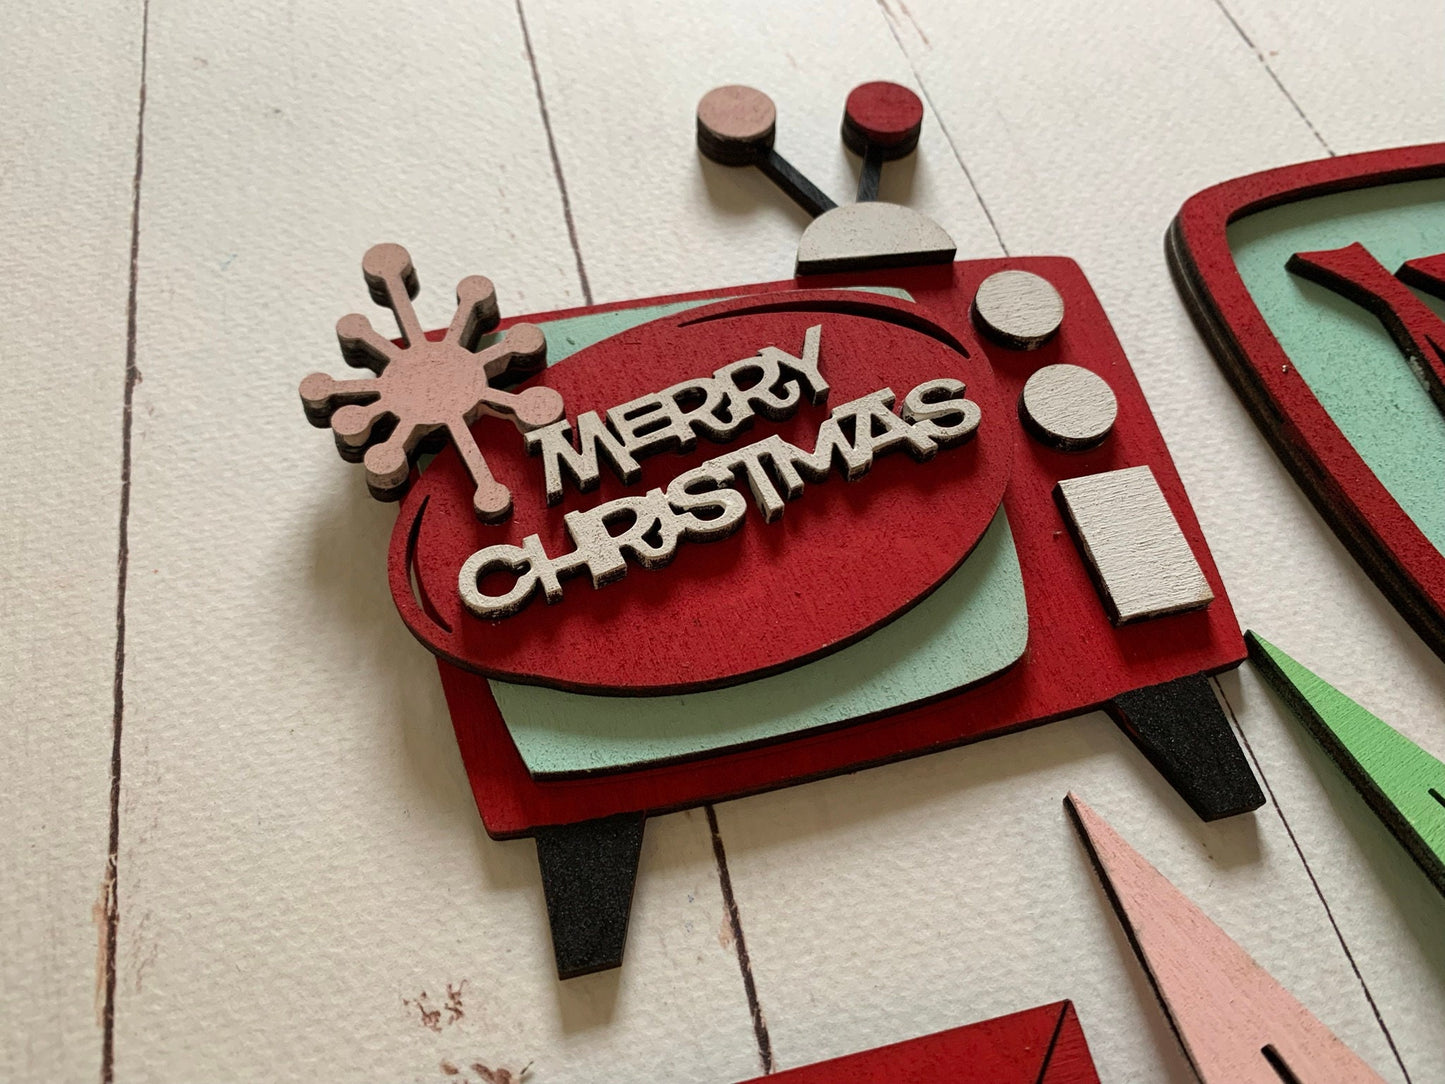 Retro Holiday - Christmas Tiered Tray Decor - Laser Cut Wood Painted, Mid Century Modern Theme Decorations